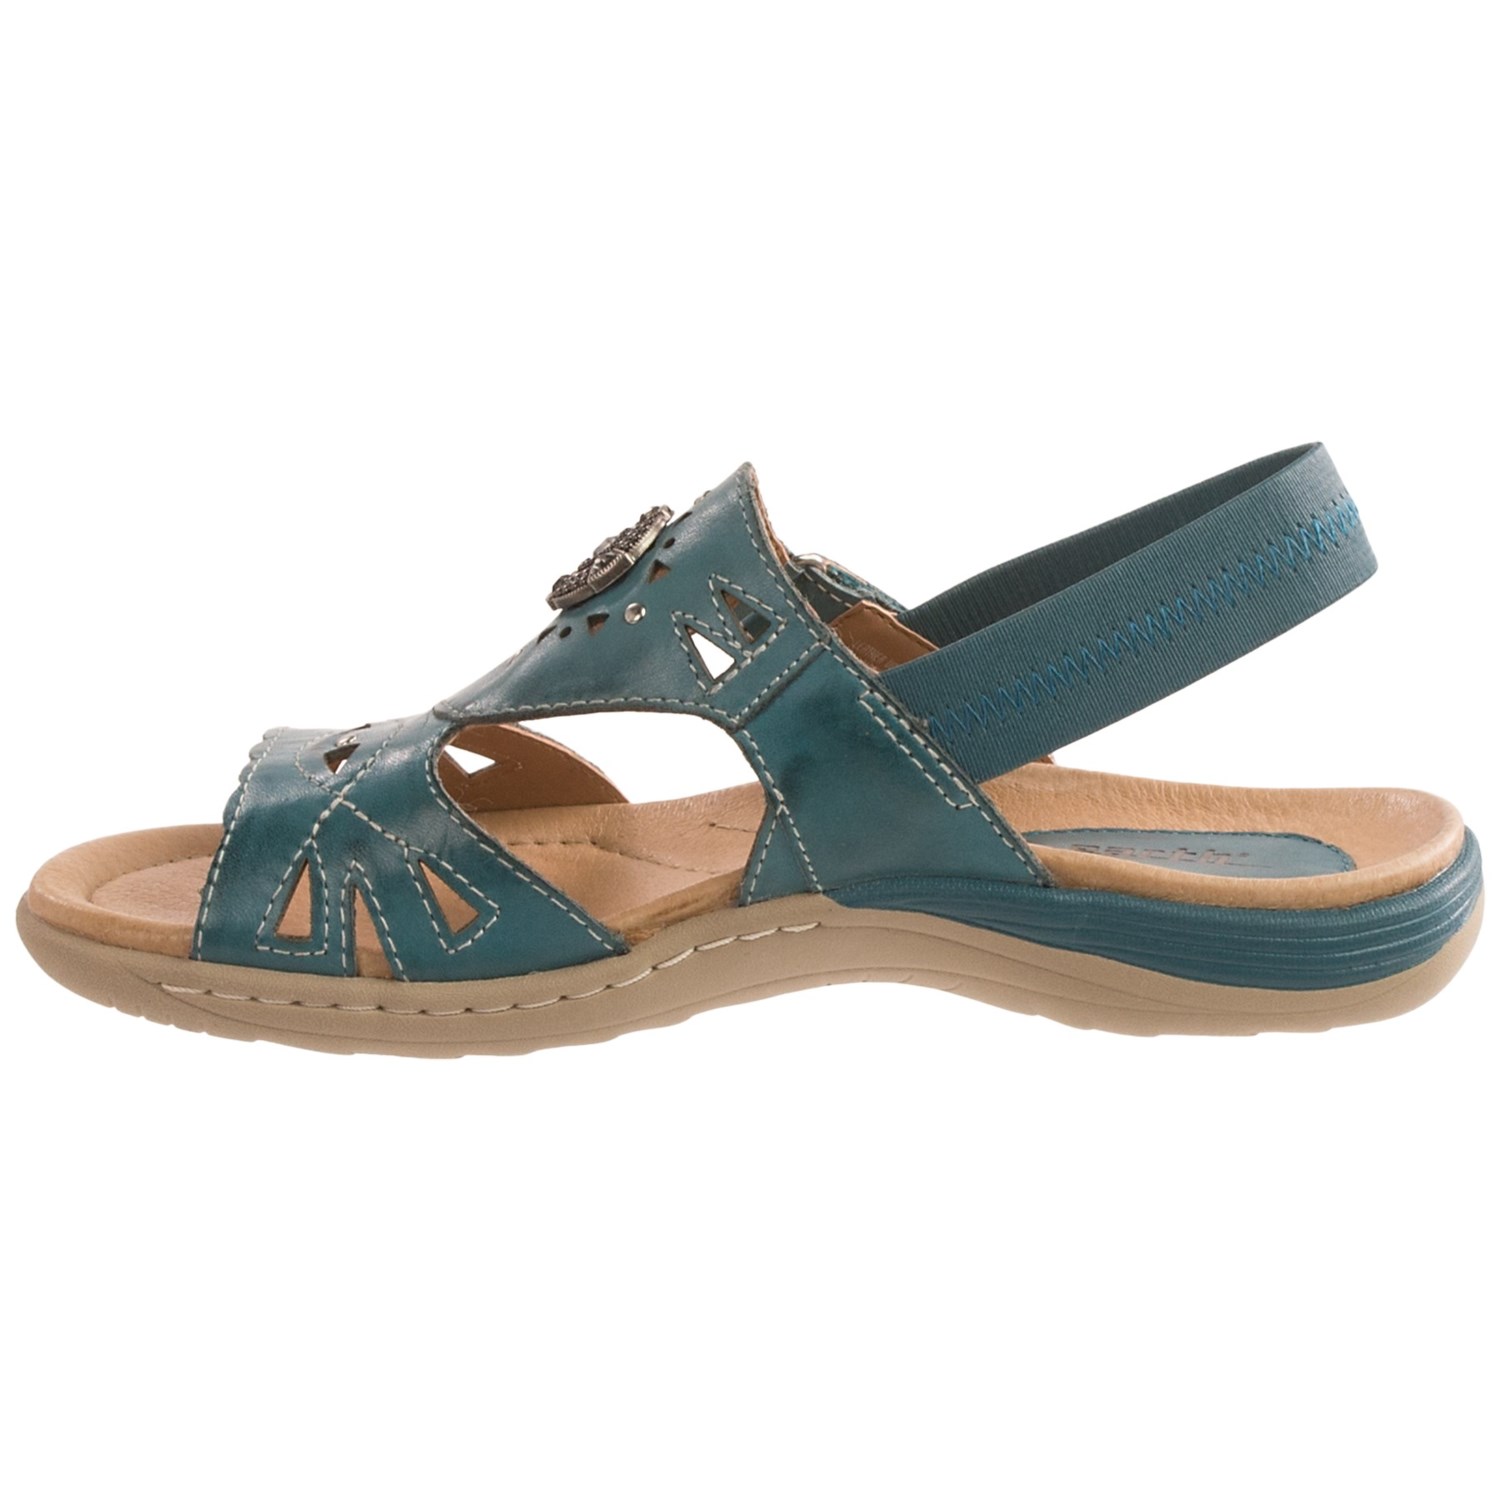 Earth Guava Leather Sandals (For Women) - Save 77%